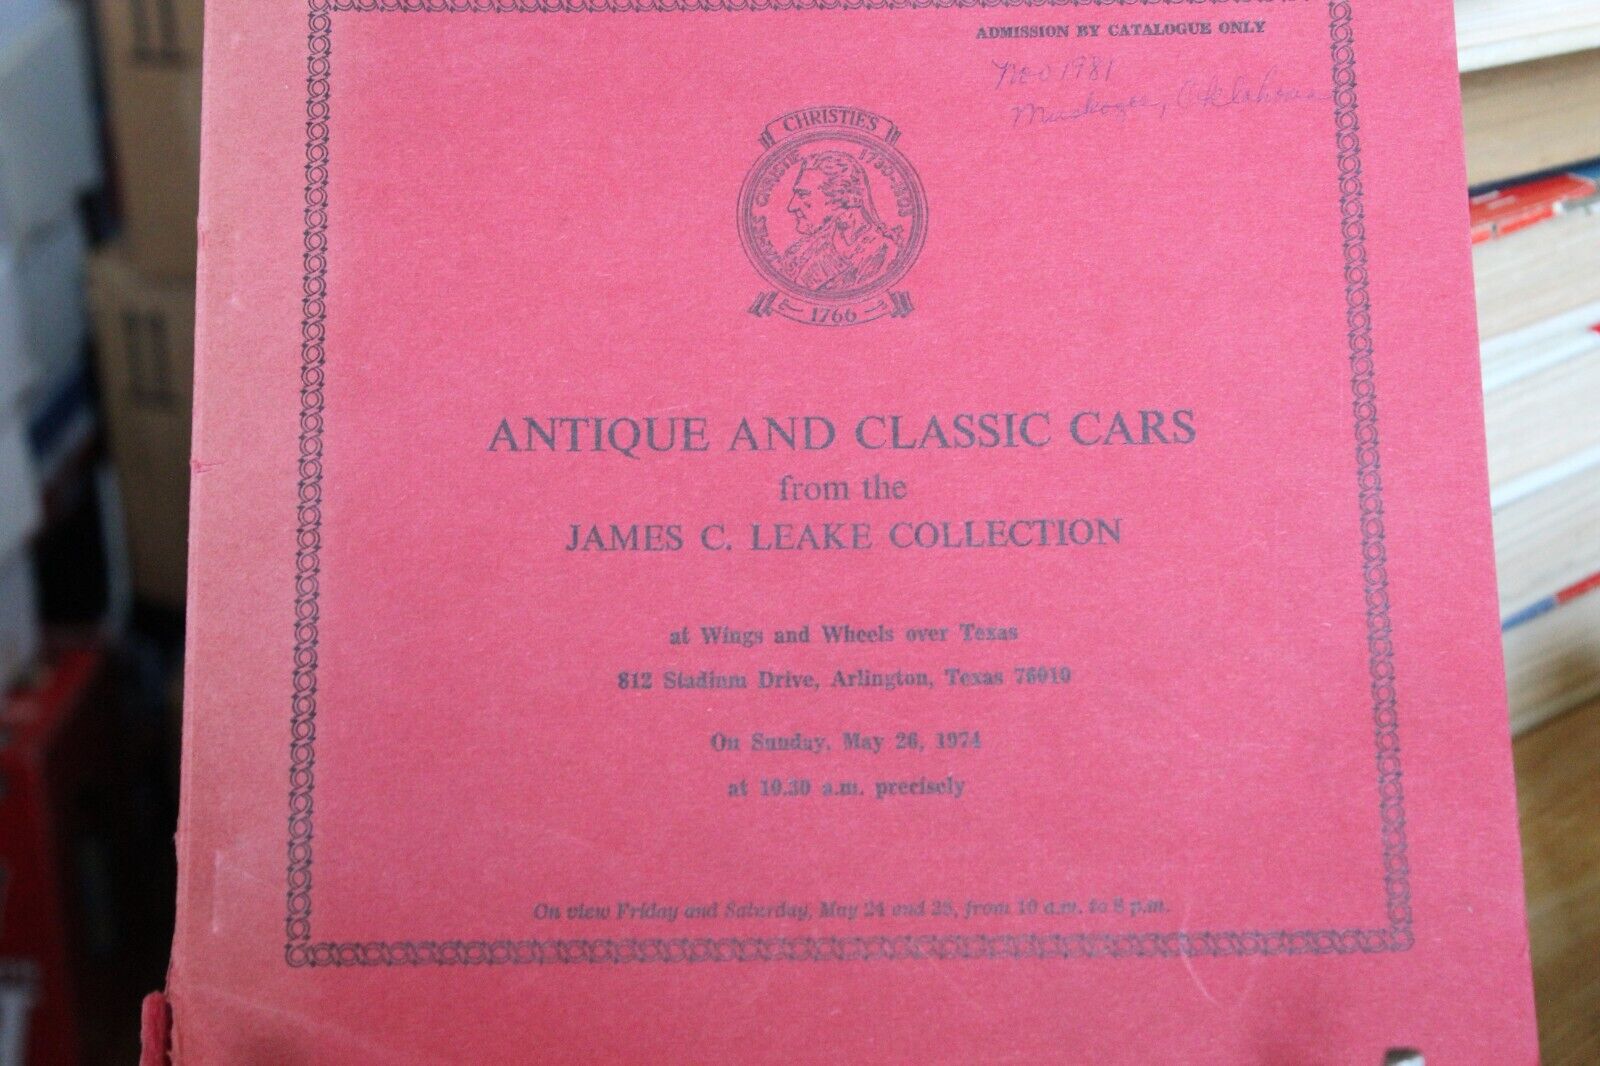 Antique & Classis Cars of James C. Leake Collection